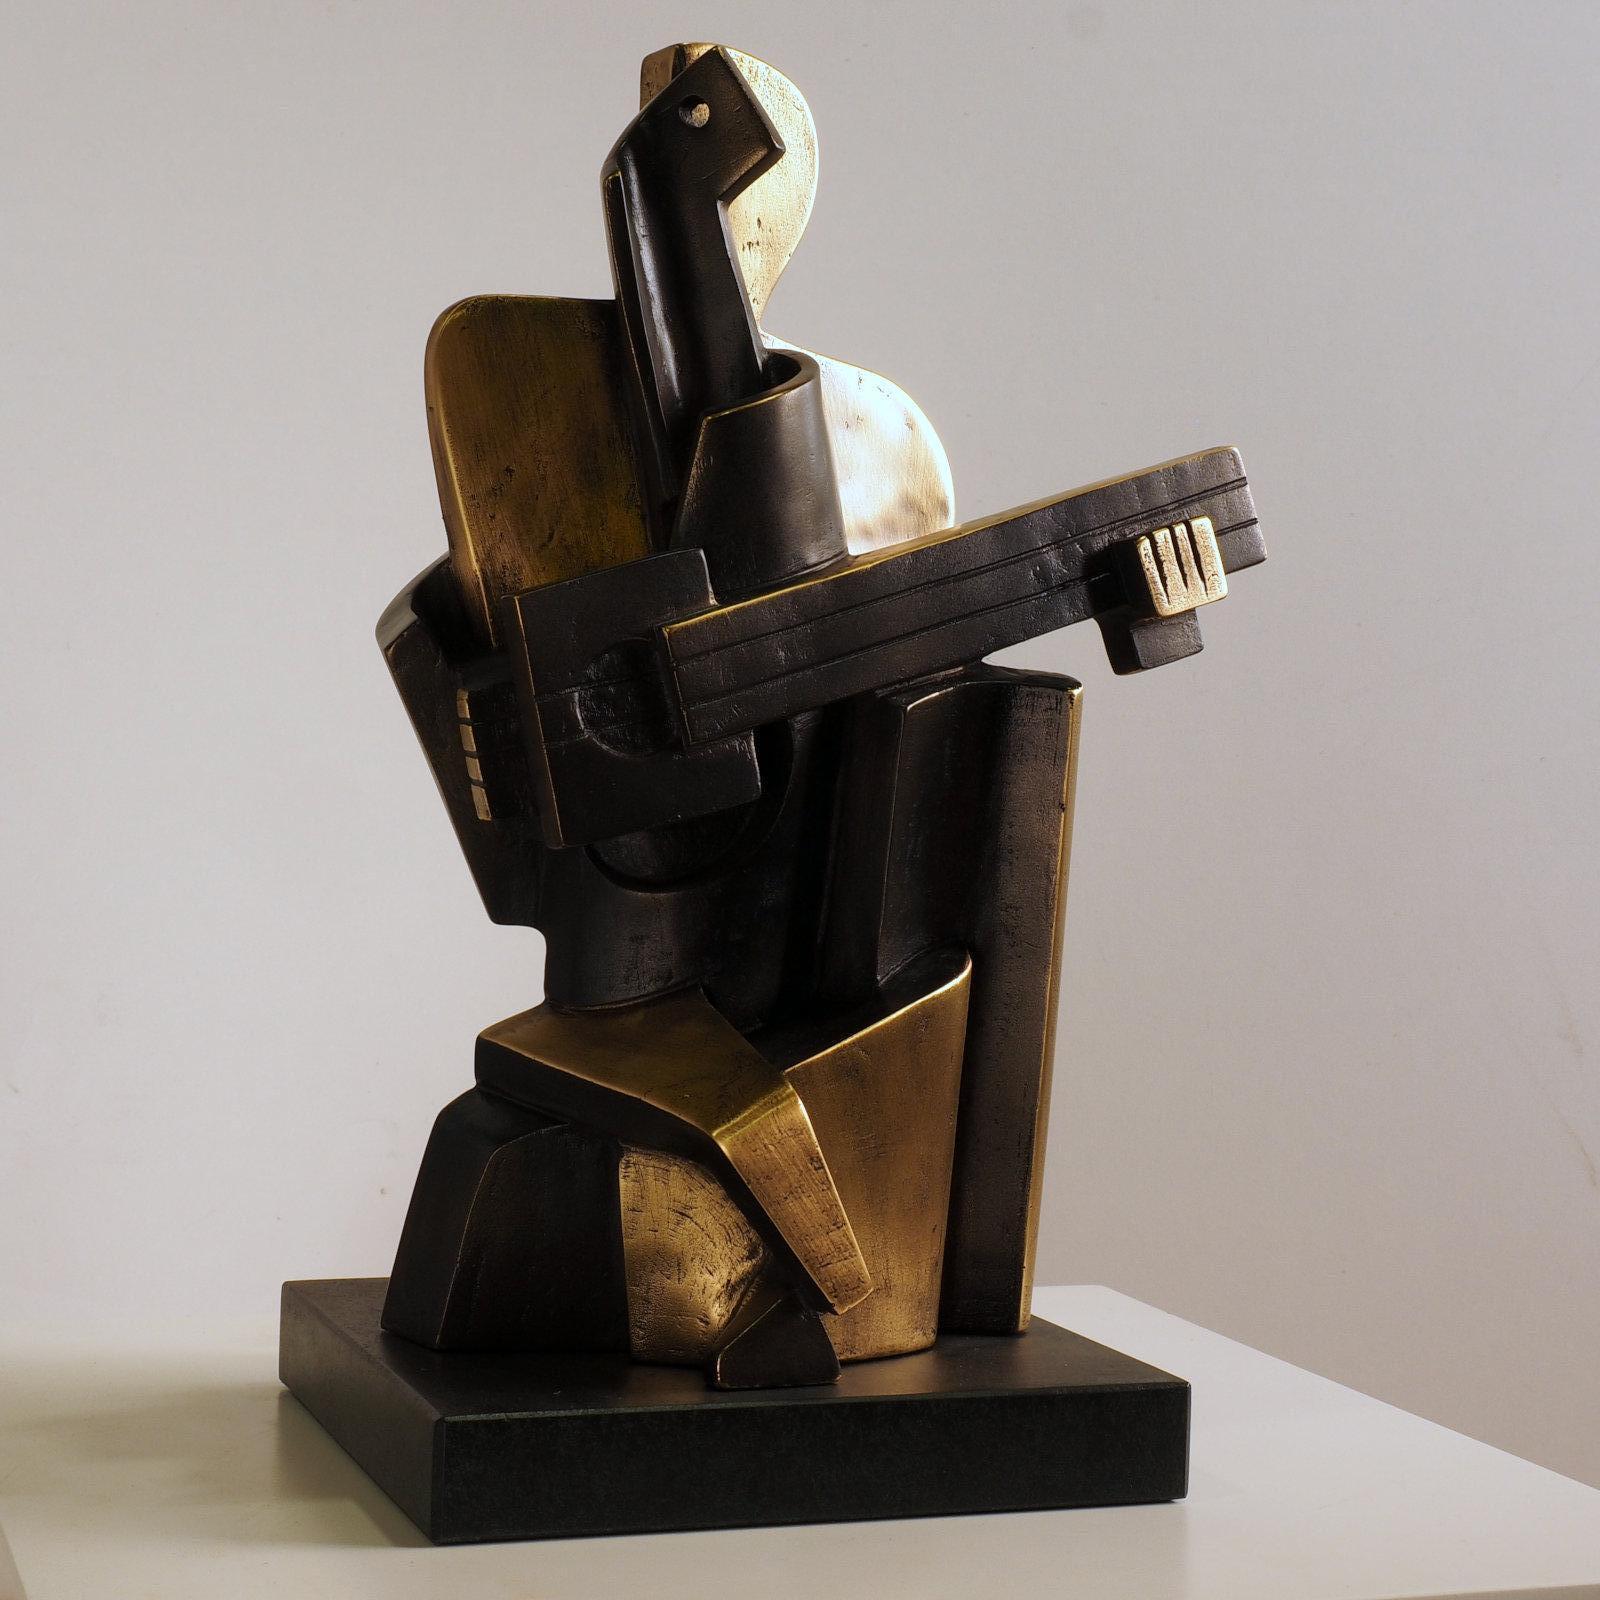 Cubist Sculpture "Big Guitarist Arlequin" by Miguel Guía.
The sculpture is made of a layer of bronze on cold smelting of copper with the base of graphite or marble dust.
Limited edition of 150 works.
Although the required time to deliver a shipment